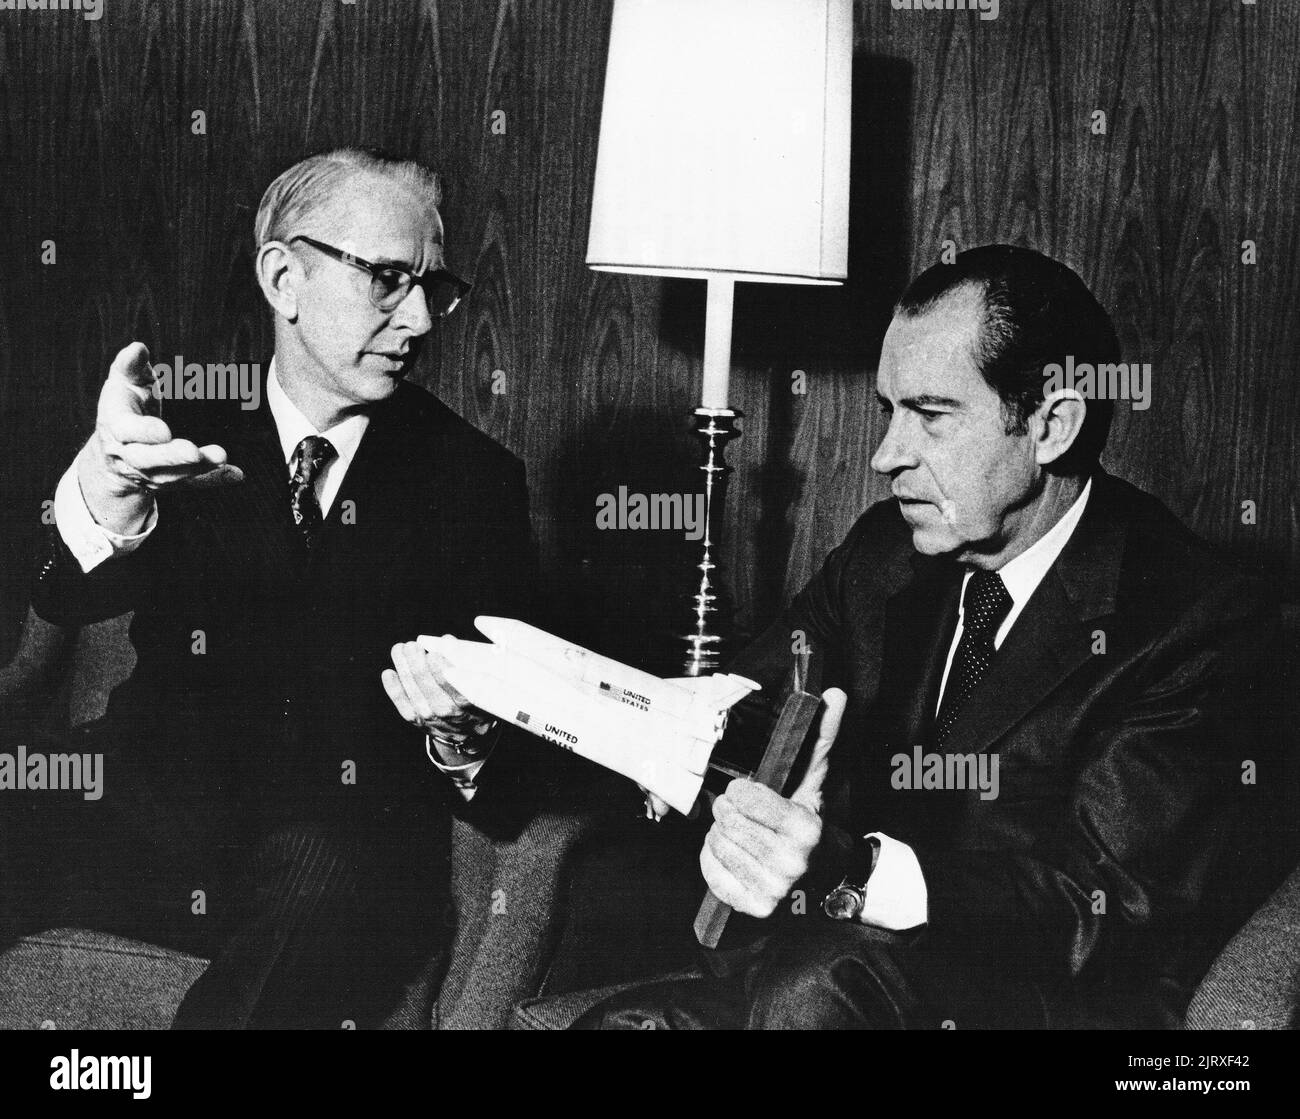 United States President Richard M. Nixon, right, and Dr. James C. Fletcher, Administrator of the National Aeronautics and Space Administration discuss the proposed space shuttle vehicle at San Clemente, California, January 5, 1972. The President announced that day the United States should proceed at once with the development of an entirely new type of space transportation system designed to help transform the space frontier of the 1970s into familiar territory, easily accessible for human endeavor in the 1980s and â90s. Credit: NASA via CNP Stock Photo